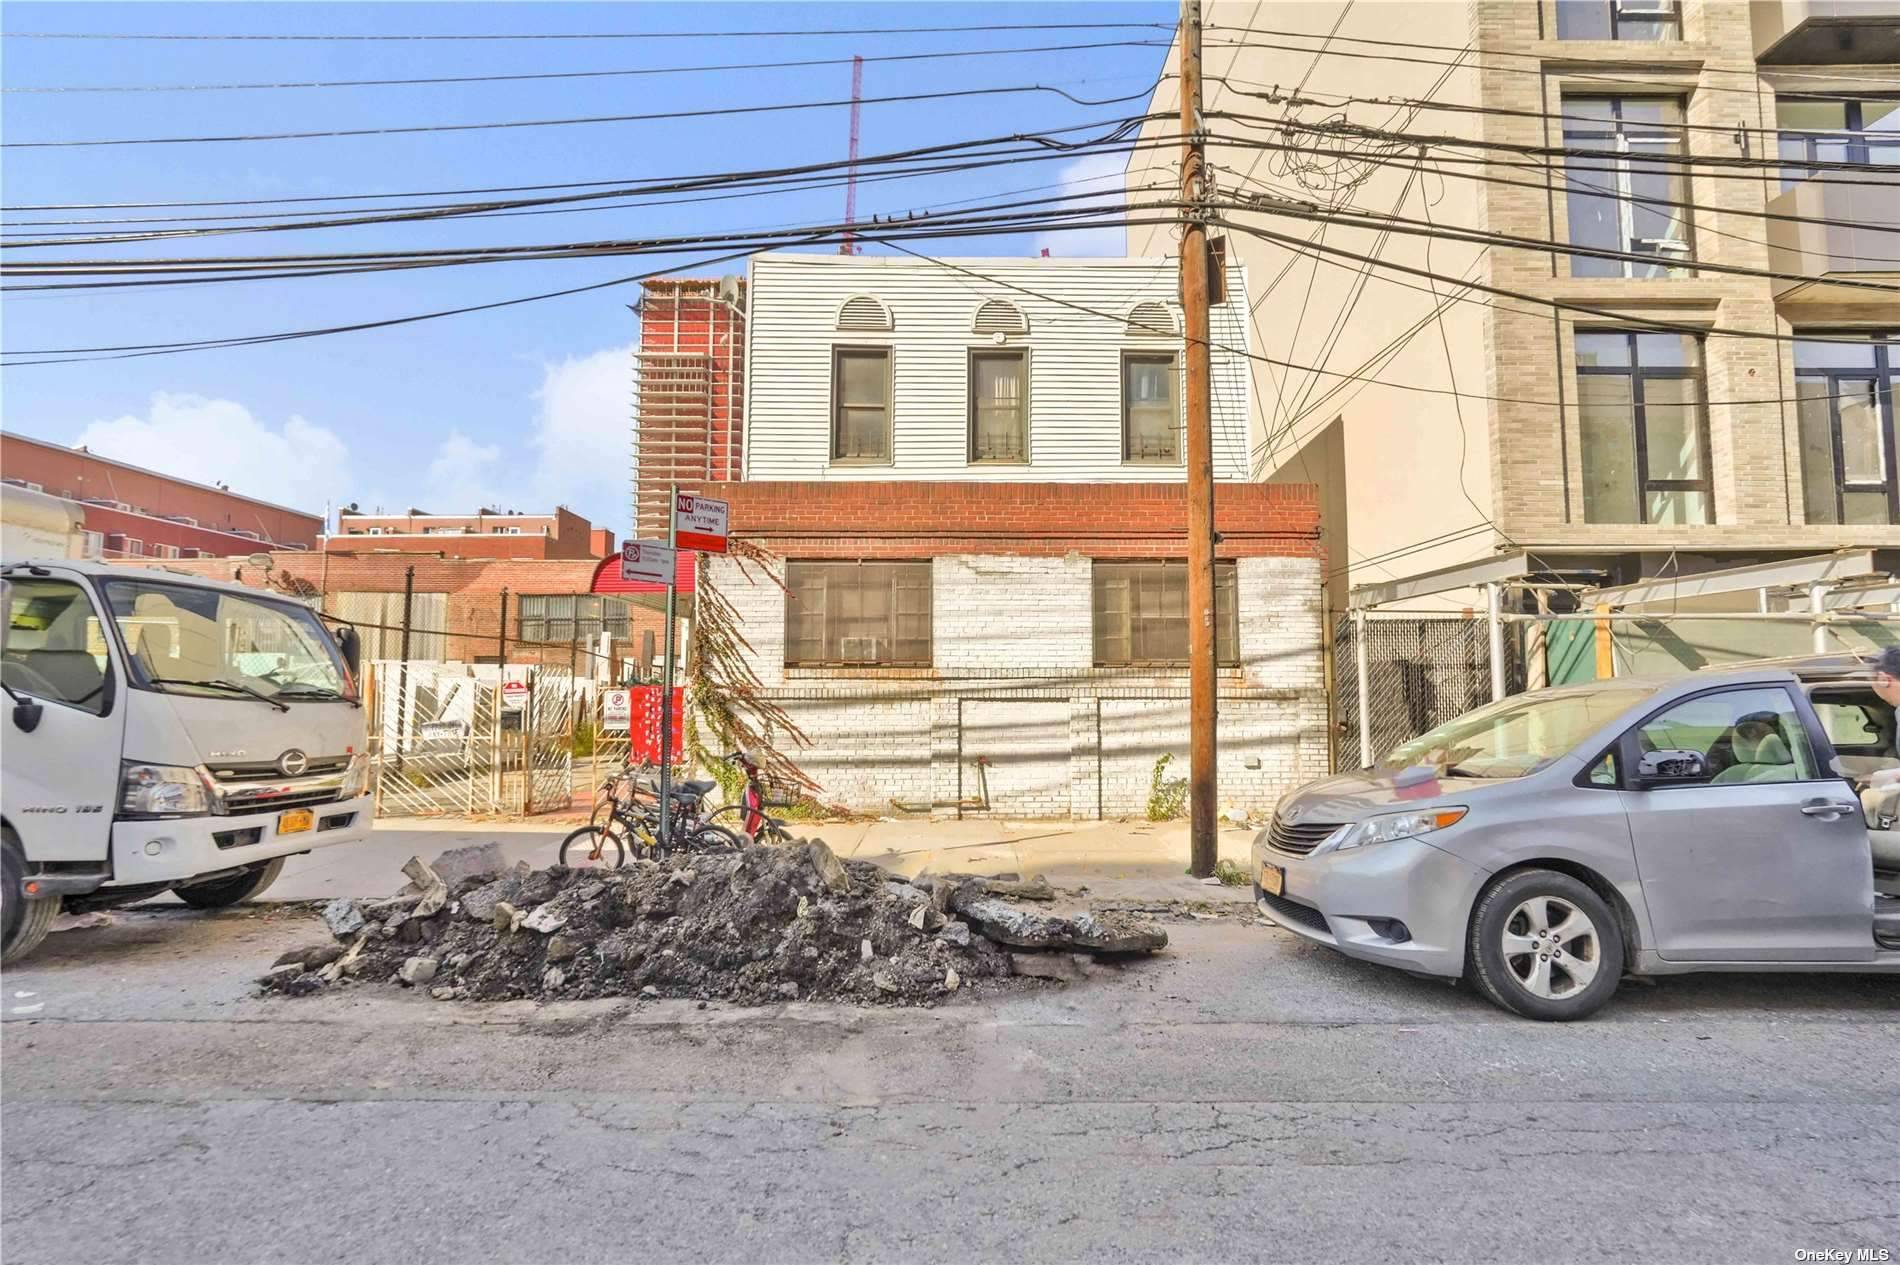 Prime Astoria LIC Development Site is being sold as land value.